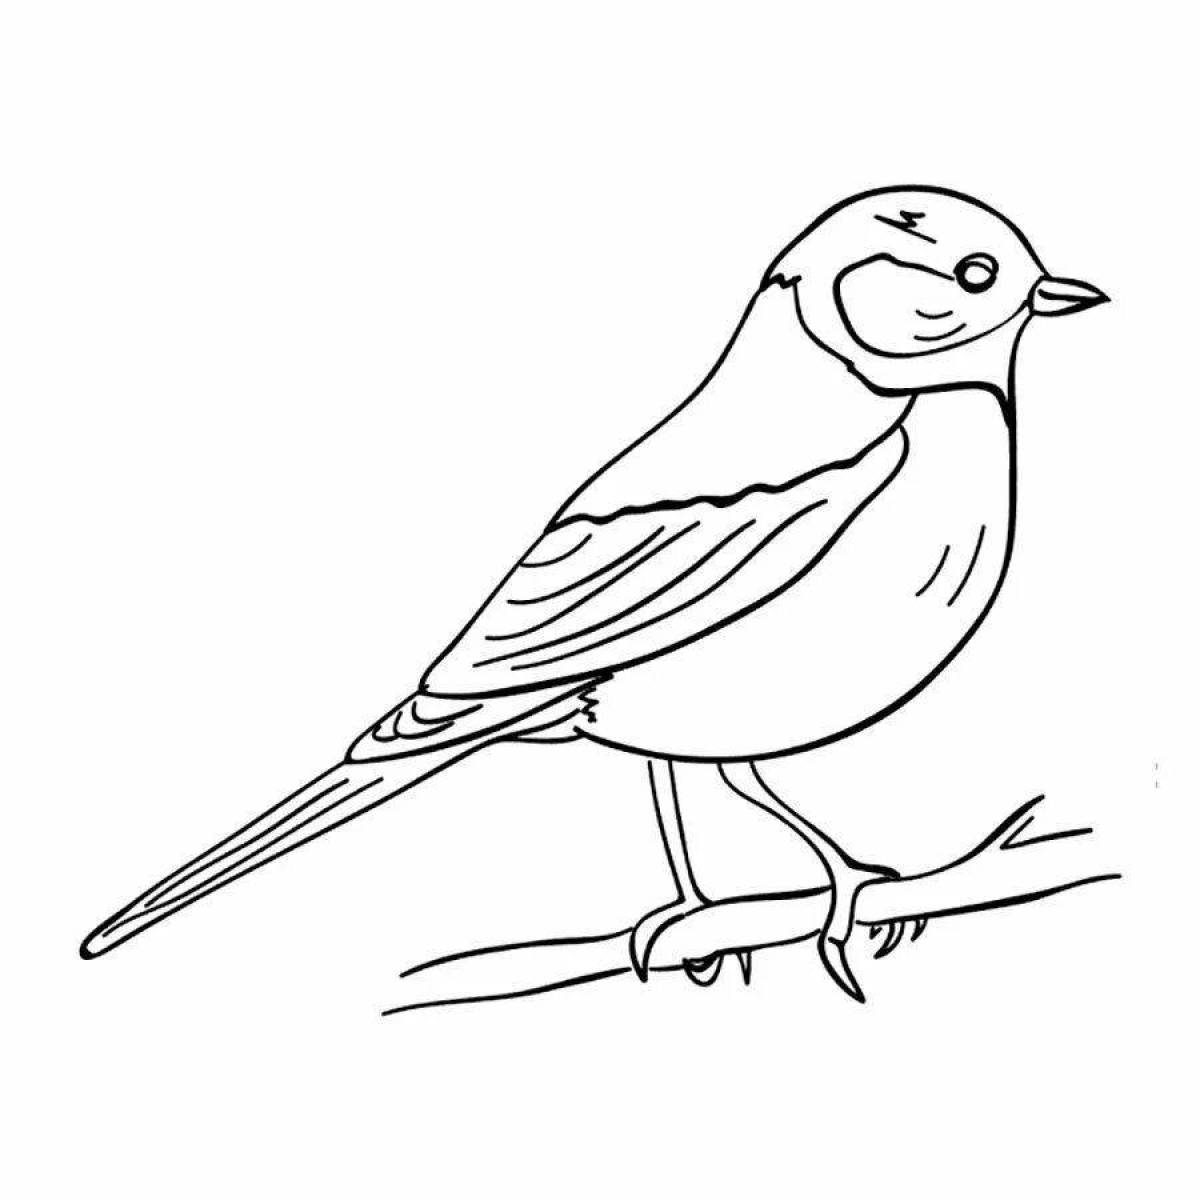 Living sparrow coloring book for kids